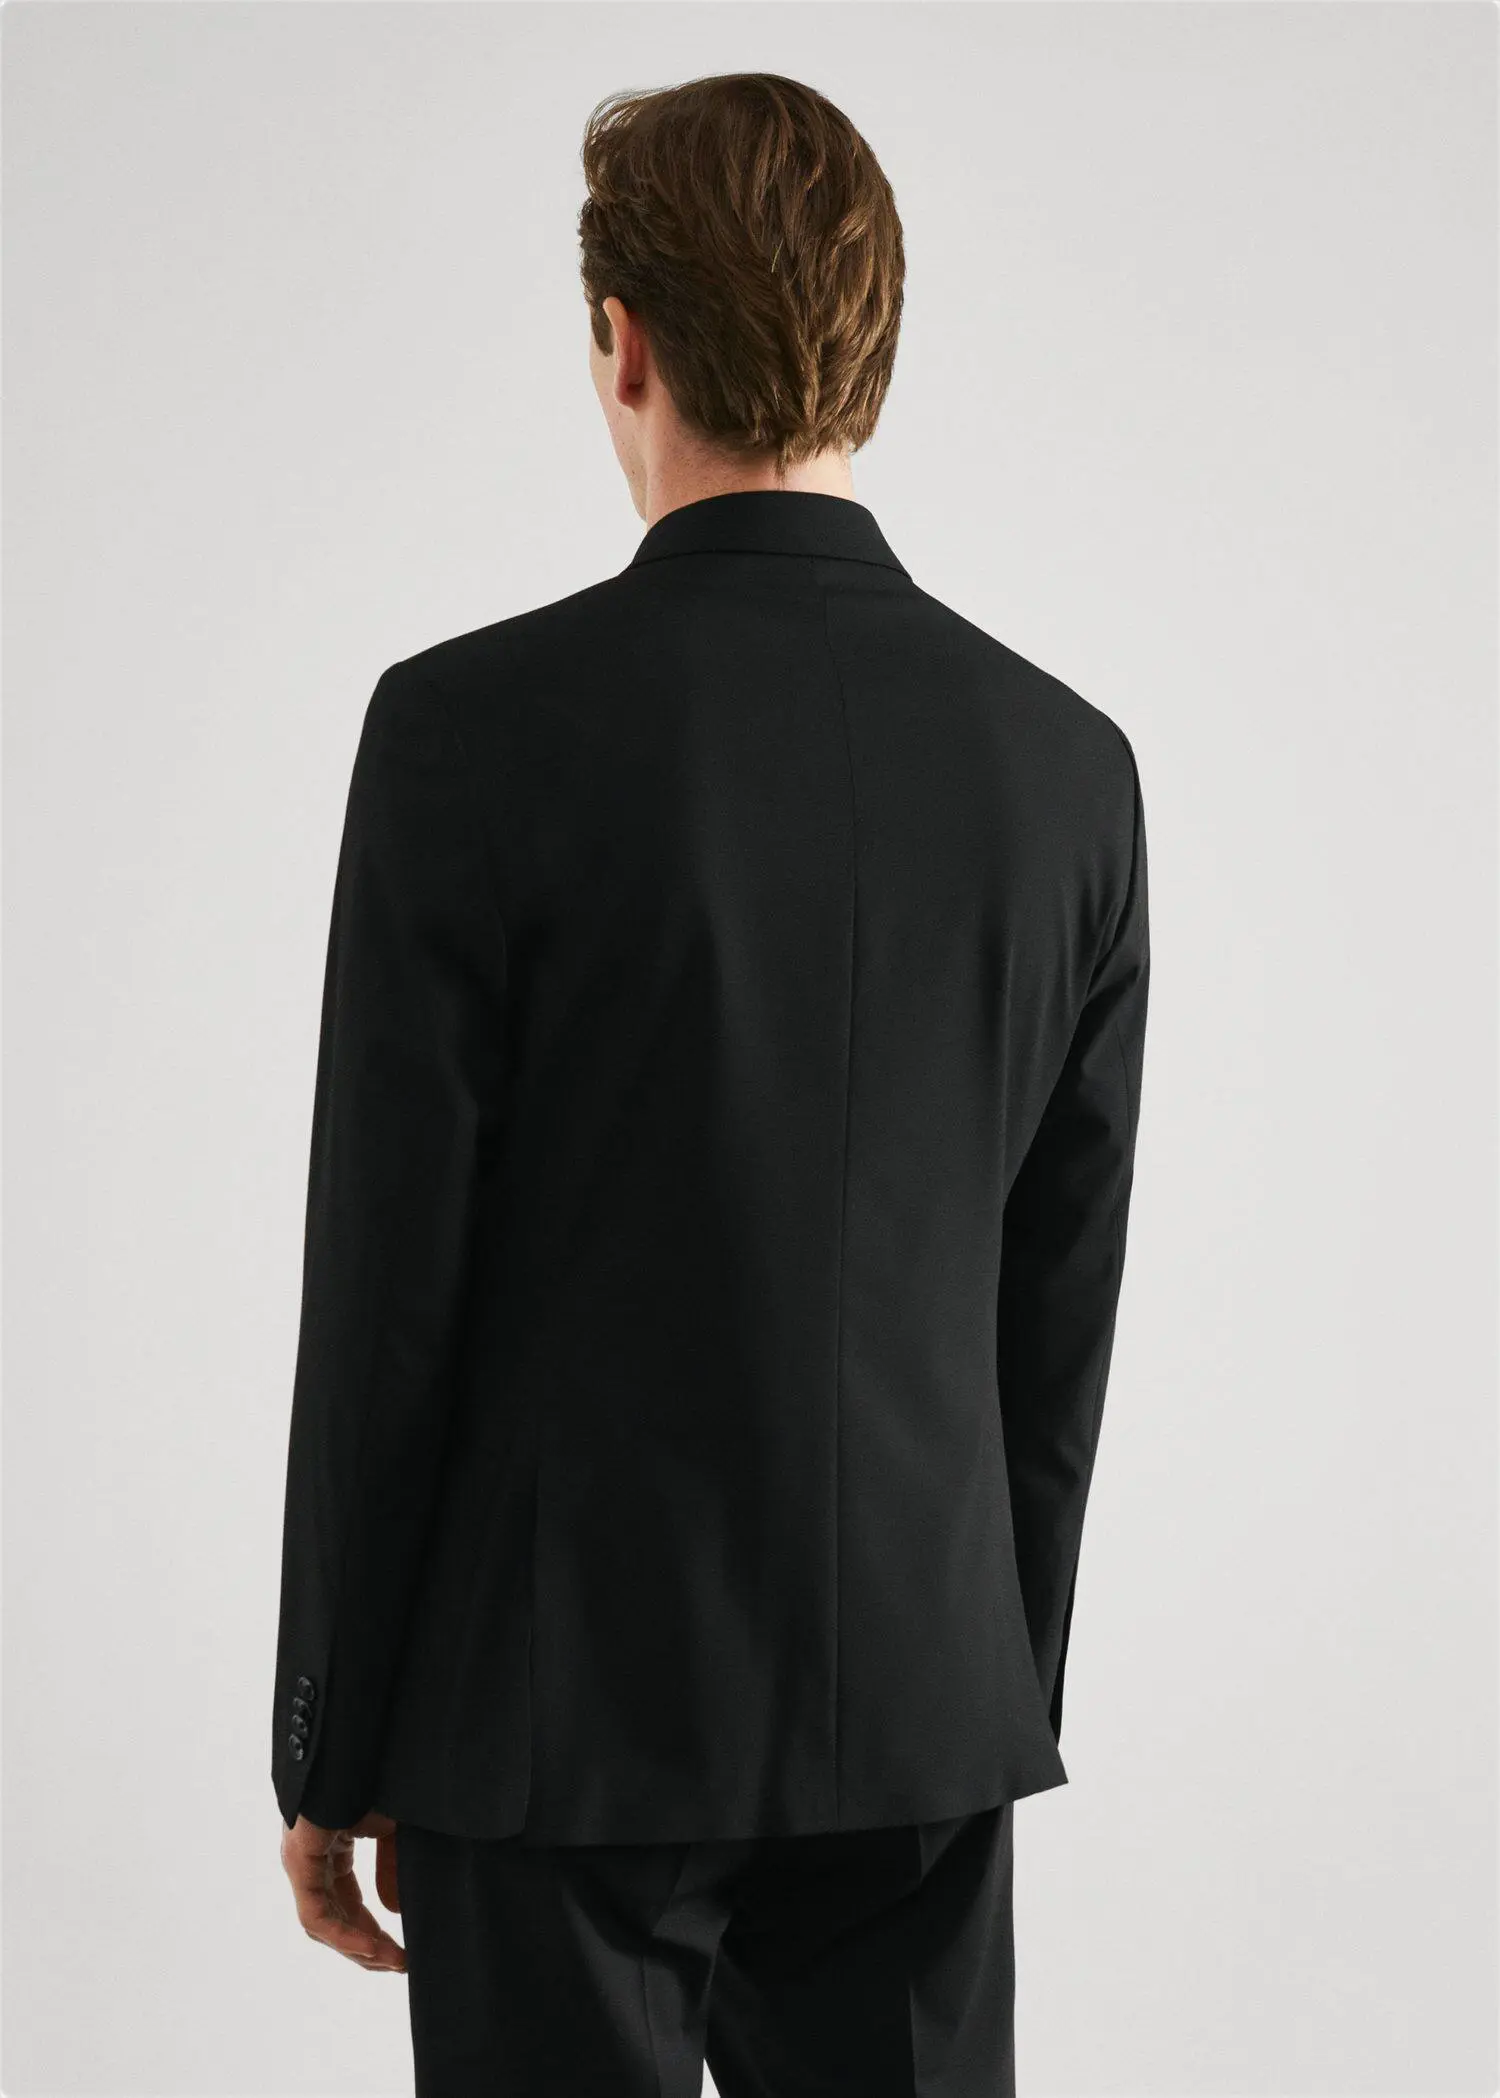 Mango Slim fit double-breasted suit blazer. a man wearing a black suit standing in front of a white wall. 